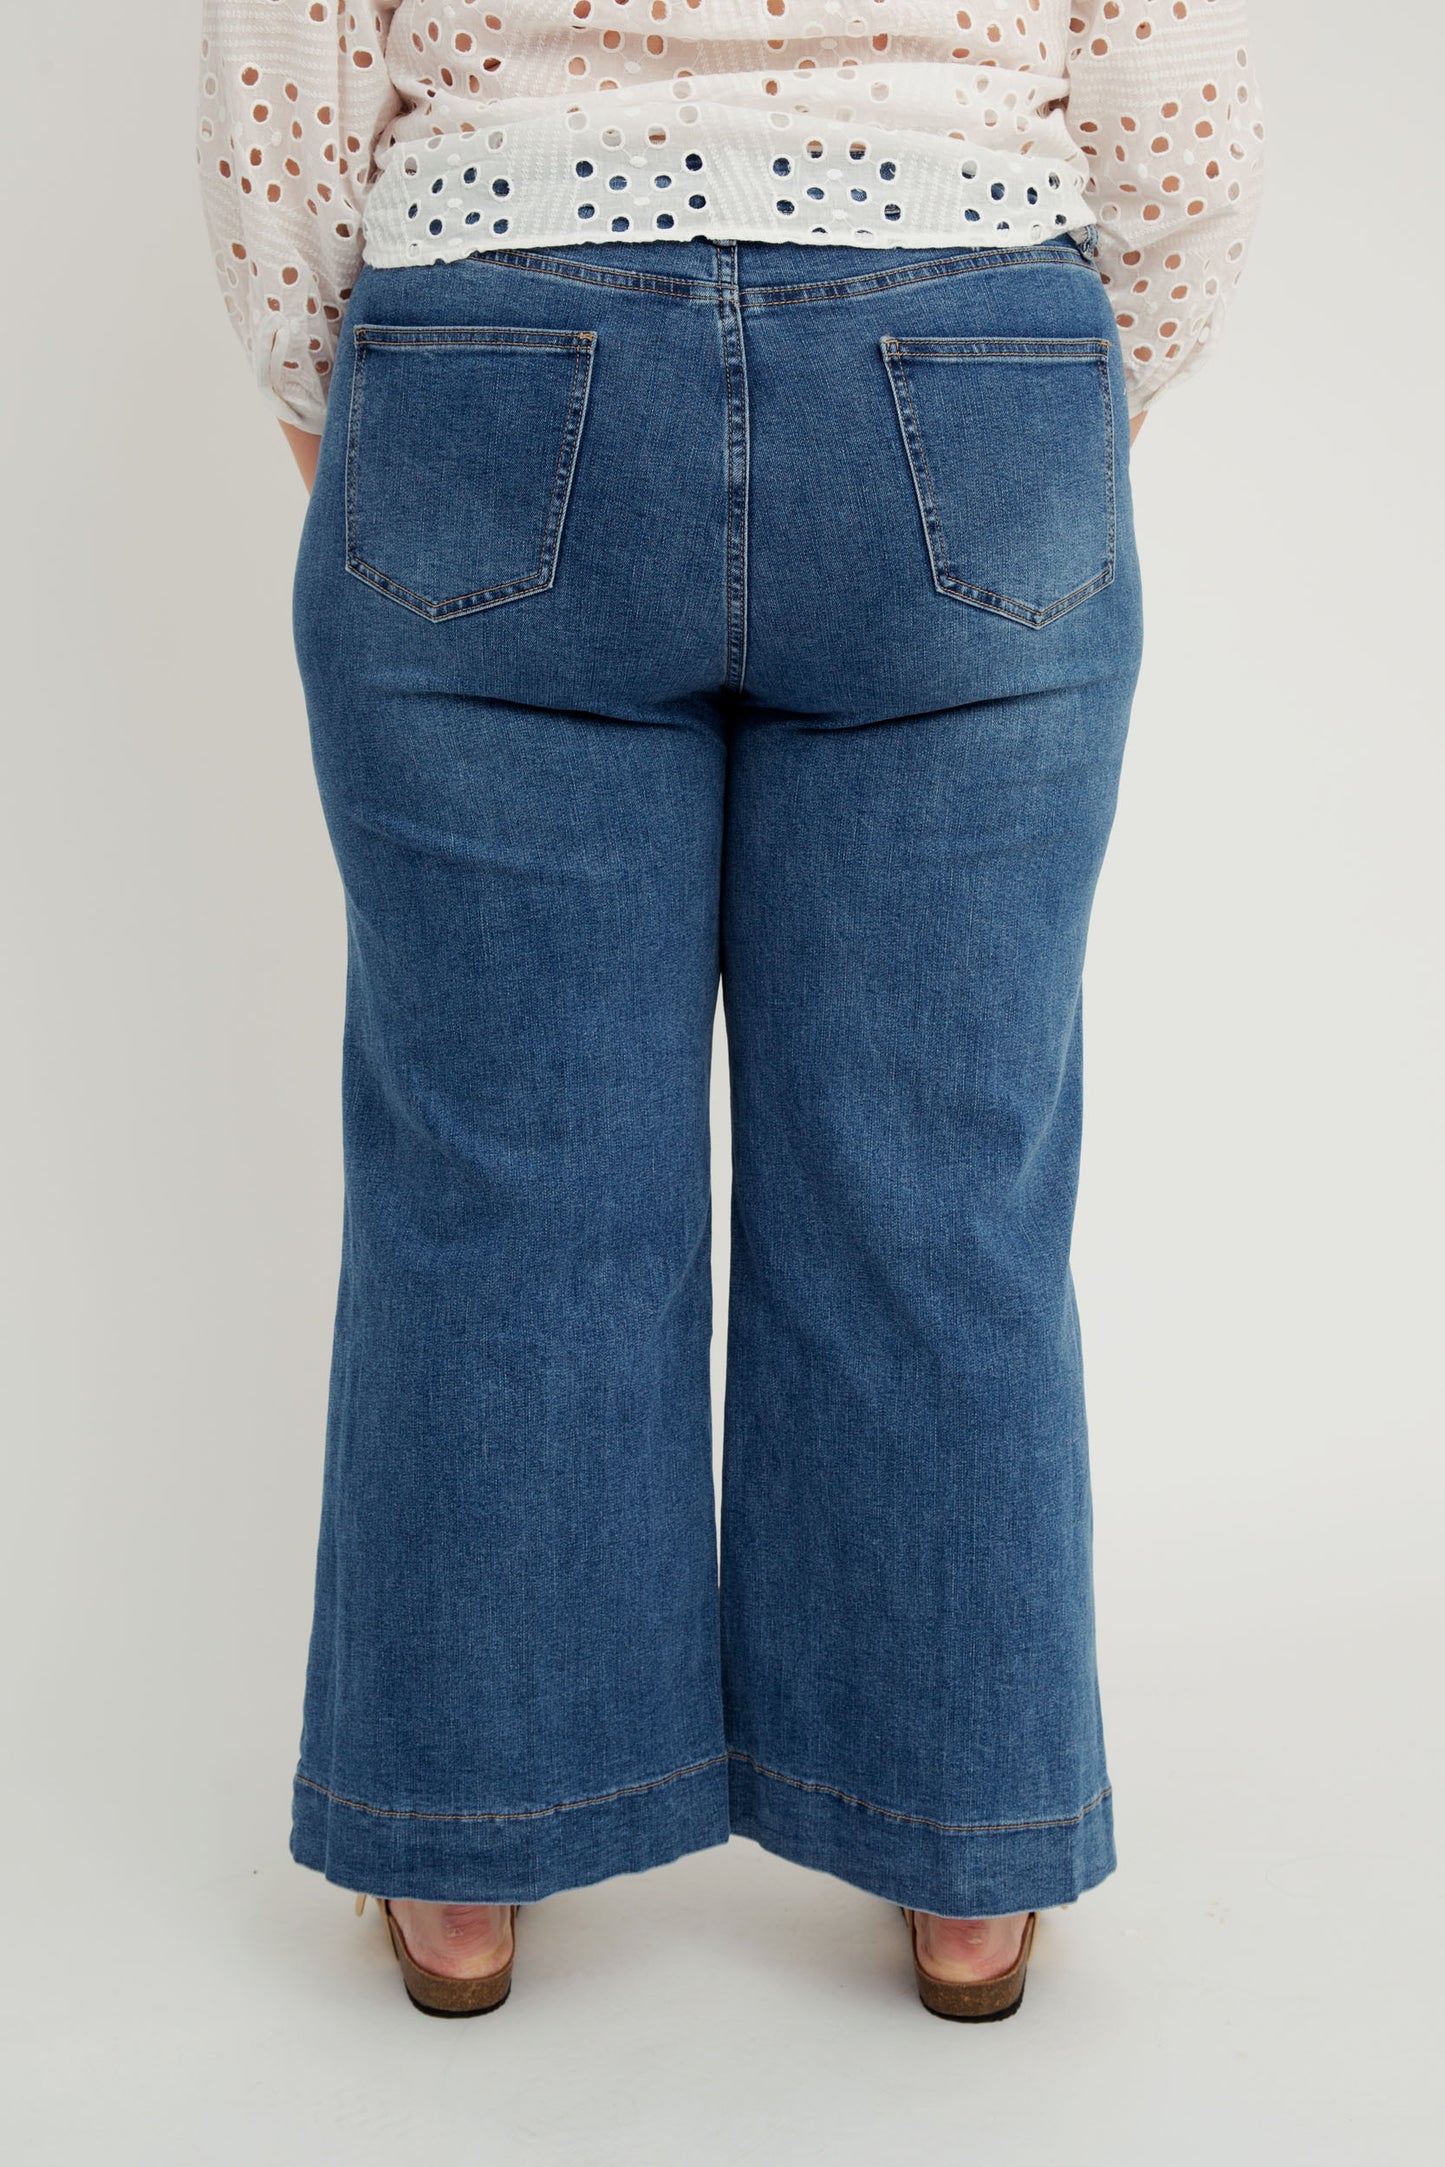 MAY Jeans - Curvy wide Fit Denim